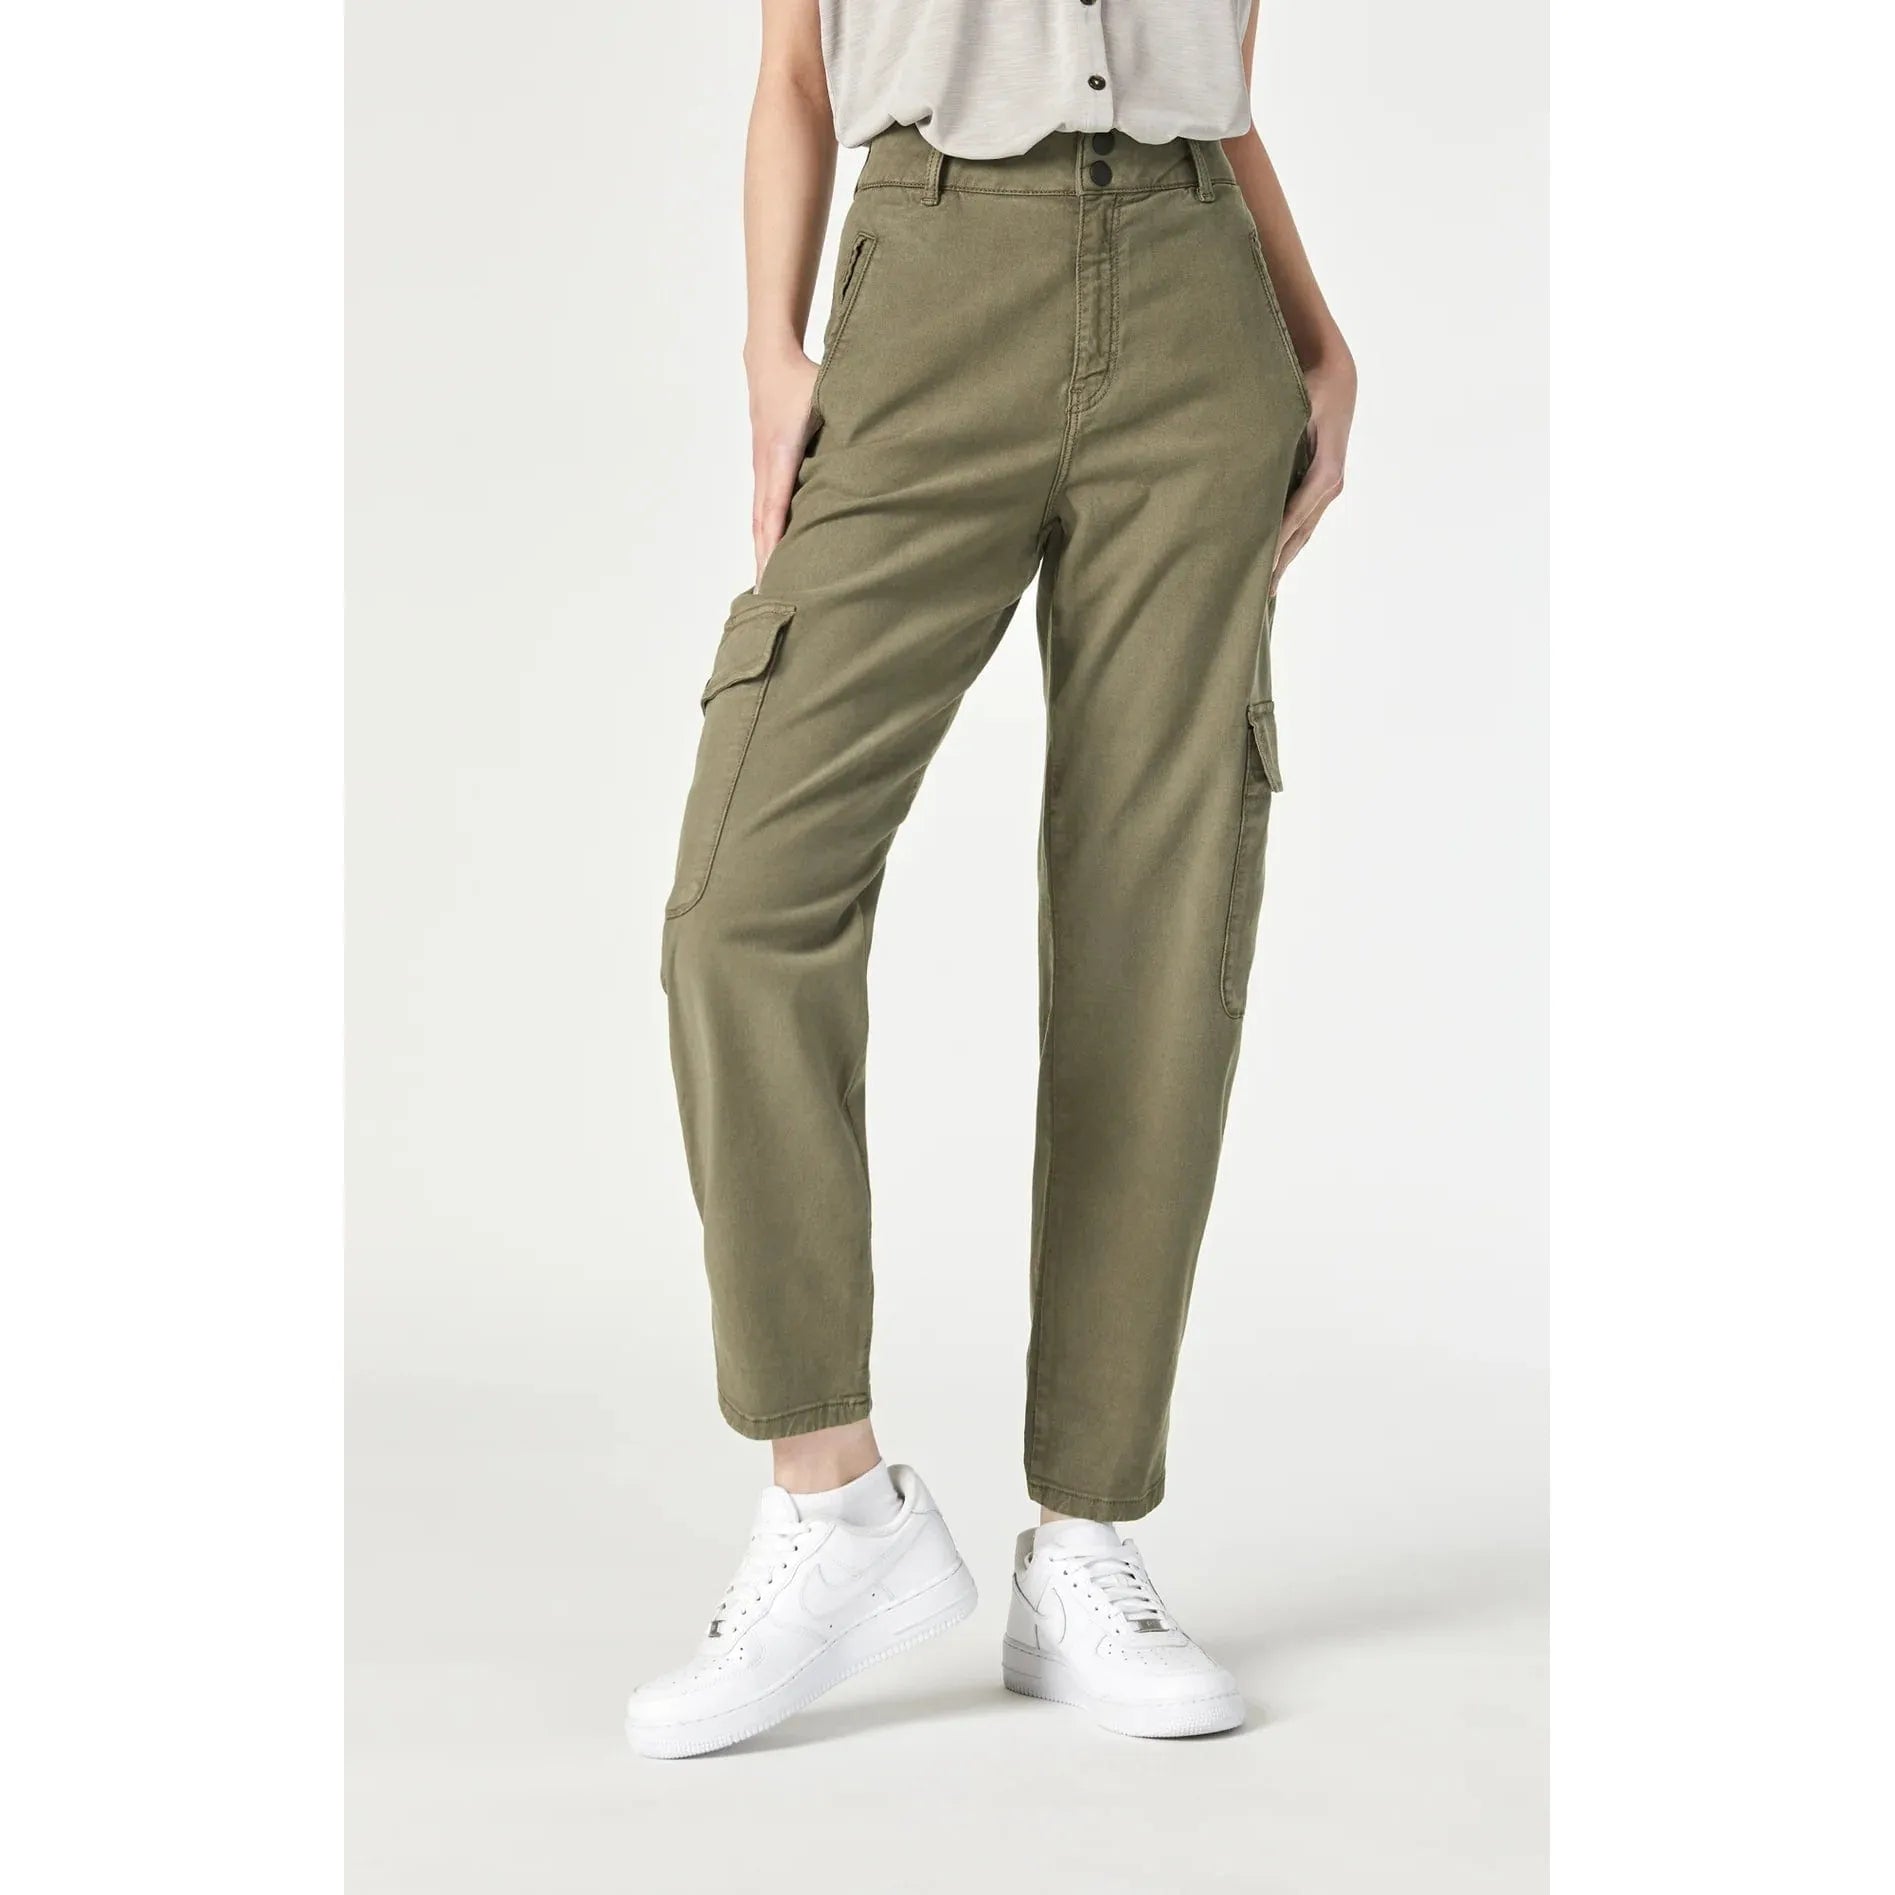 SBetro Women's Pants On Sale Up To 90% Off Retail